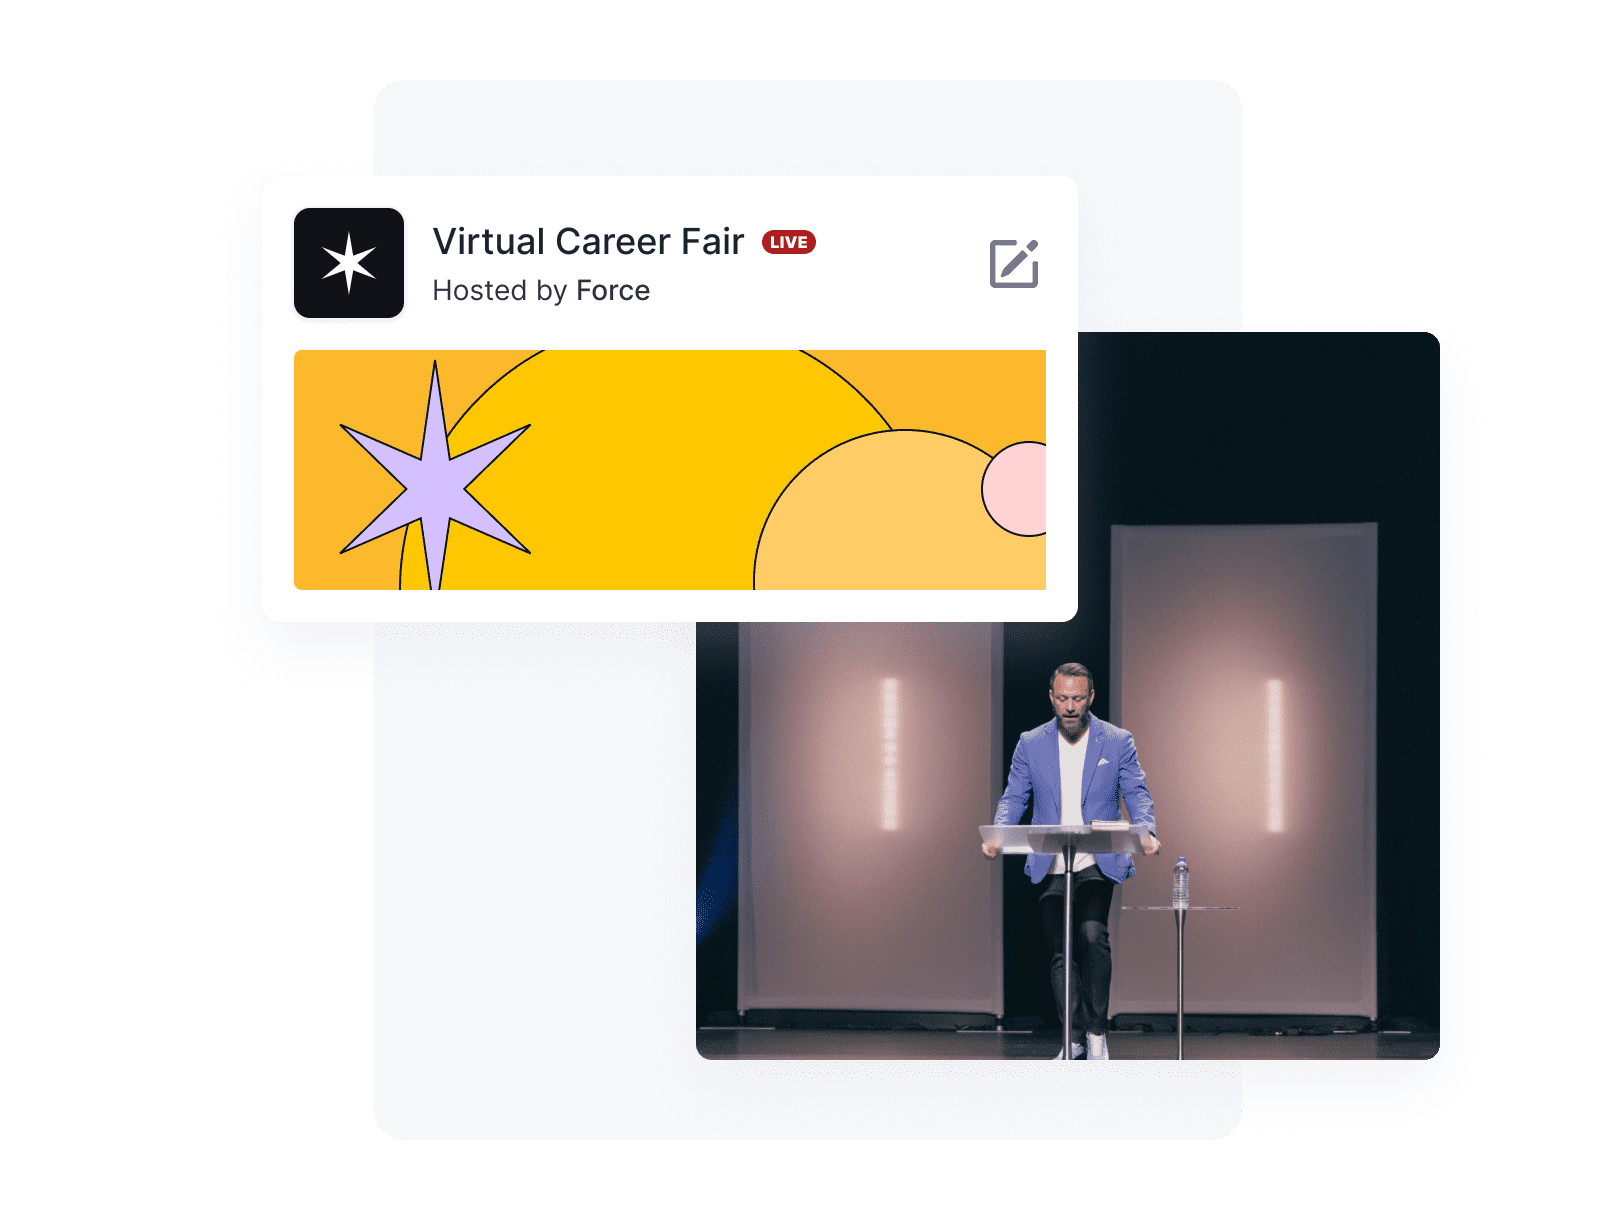 Cover of Virtual Career Fair showing that it's live with a man in blue blazer speaking on stage at a podium